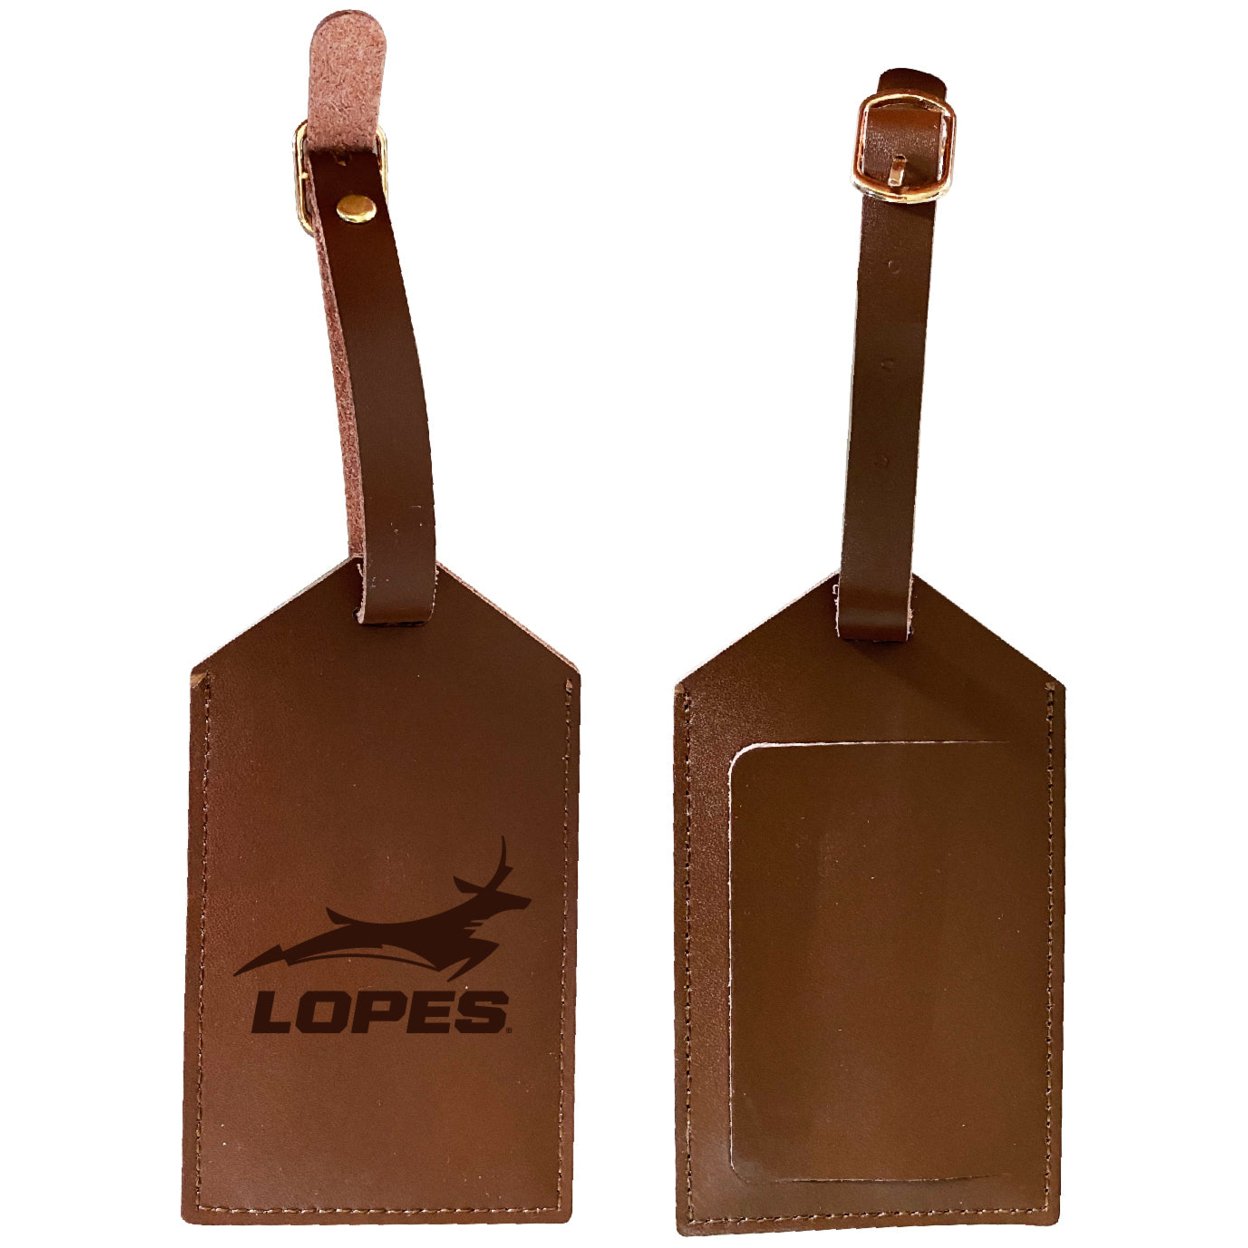 Grand Canyon University Lopes Leather Luggage Tag Engraved